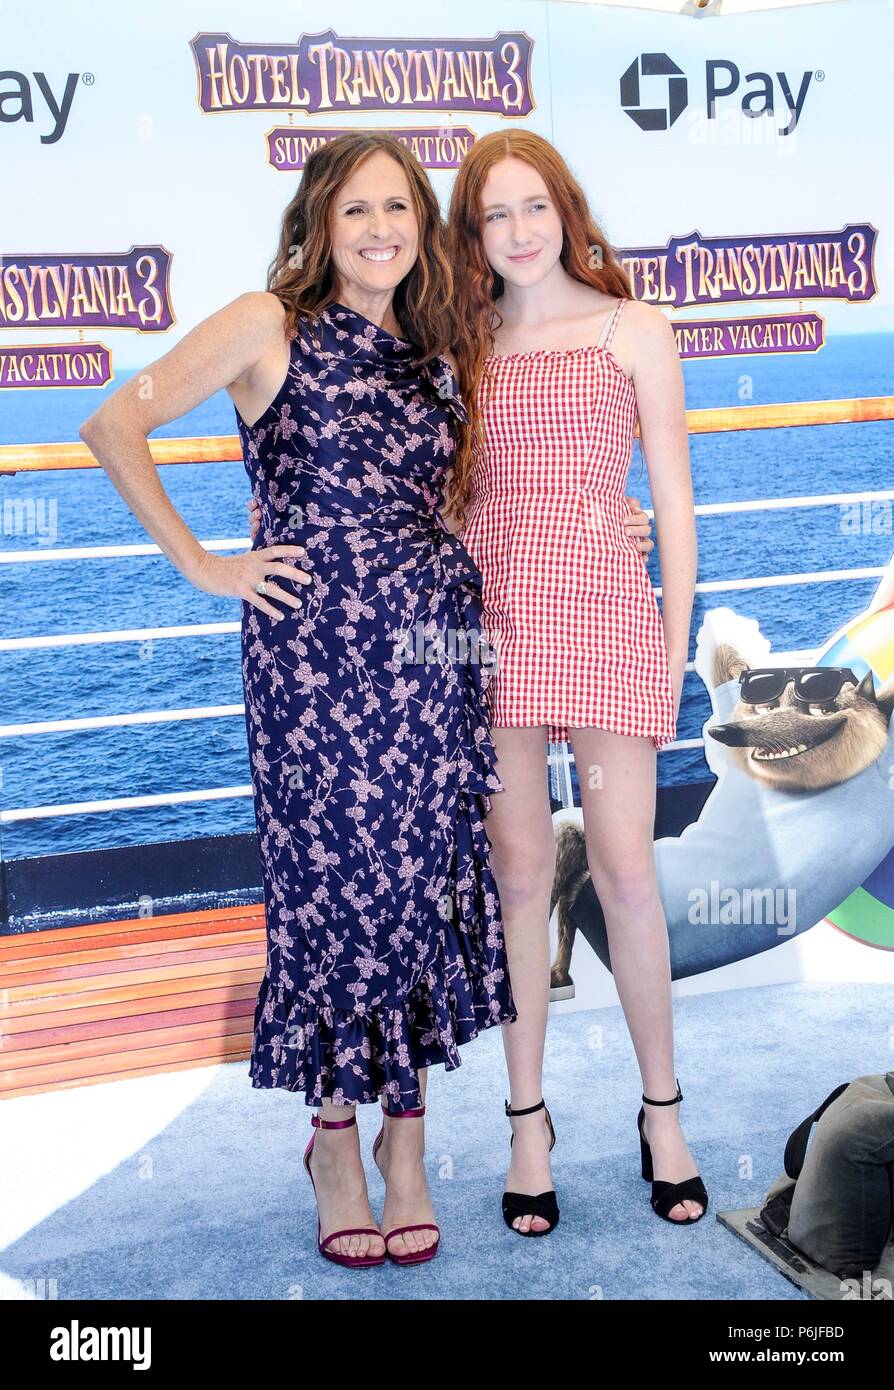 Los Angeles, CA, USA. 30th June, 2018. Molly Shannon, Stella Shannon Chesnut at arrivals for HOTEL TRANSYLVANIA 3: SUMMER VACATION Premiere, Regency Village Theatre - Westwood, Los Angeles, CA June 30, 2018. Credit: Elizabeth Goodenough/Everett Collection/Alamy Live News Stock Photo